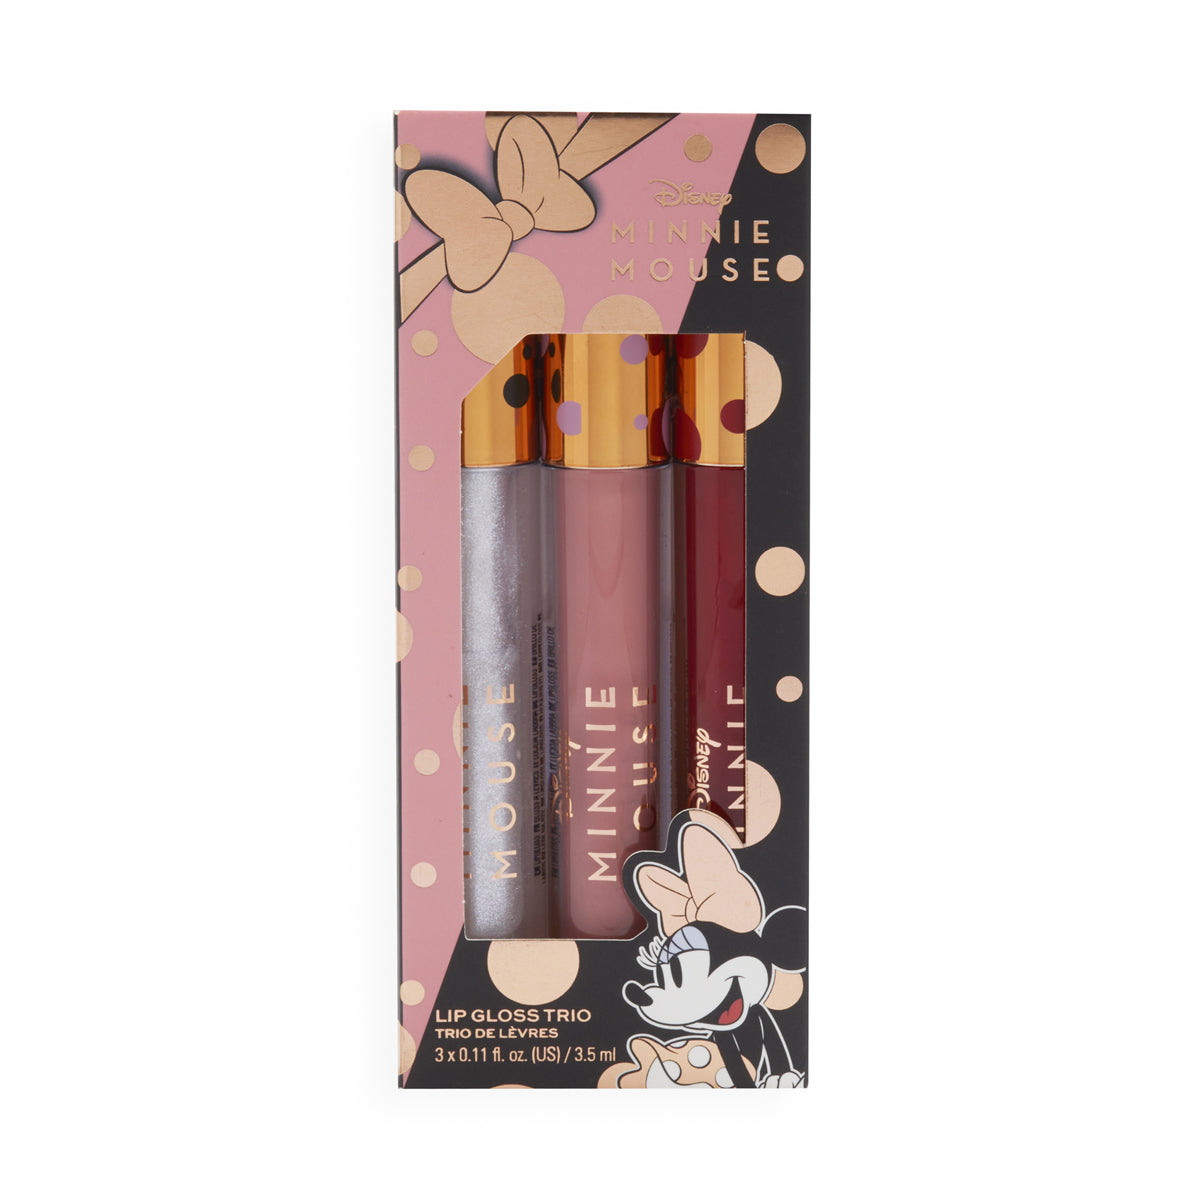 LIPGLOSS TRIO OUTLET - MAKE UP REVOLUTION X MINNIE MOUSE